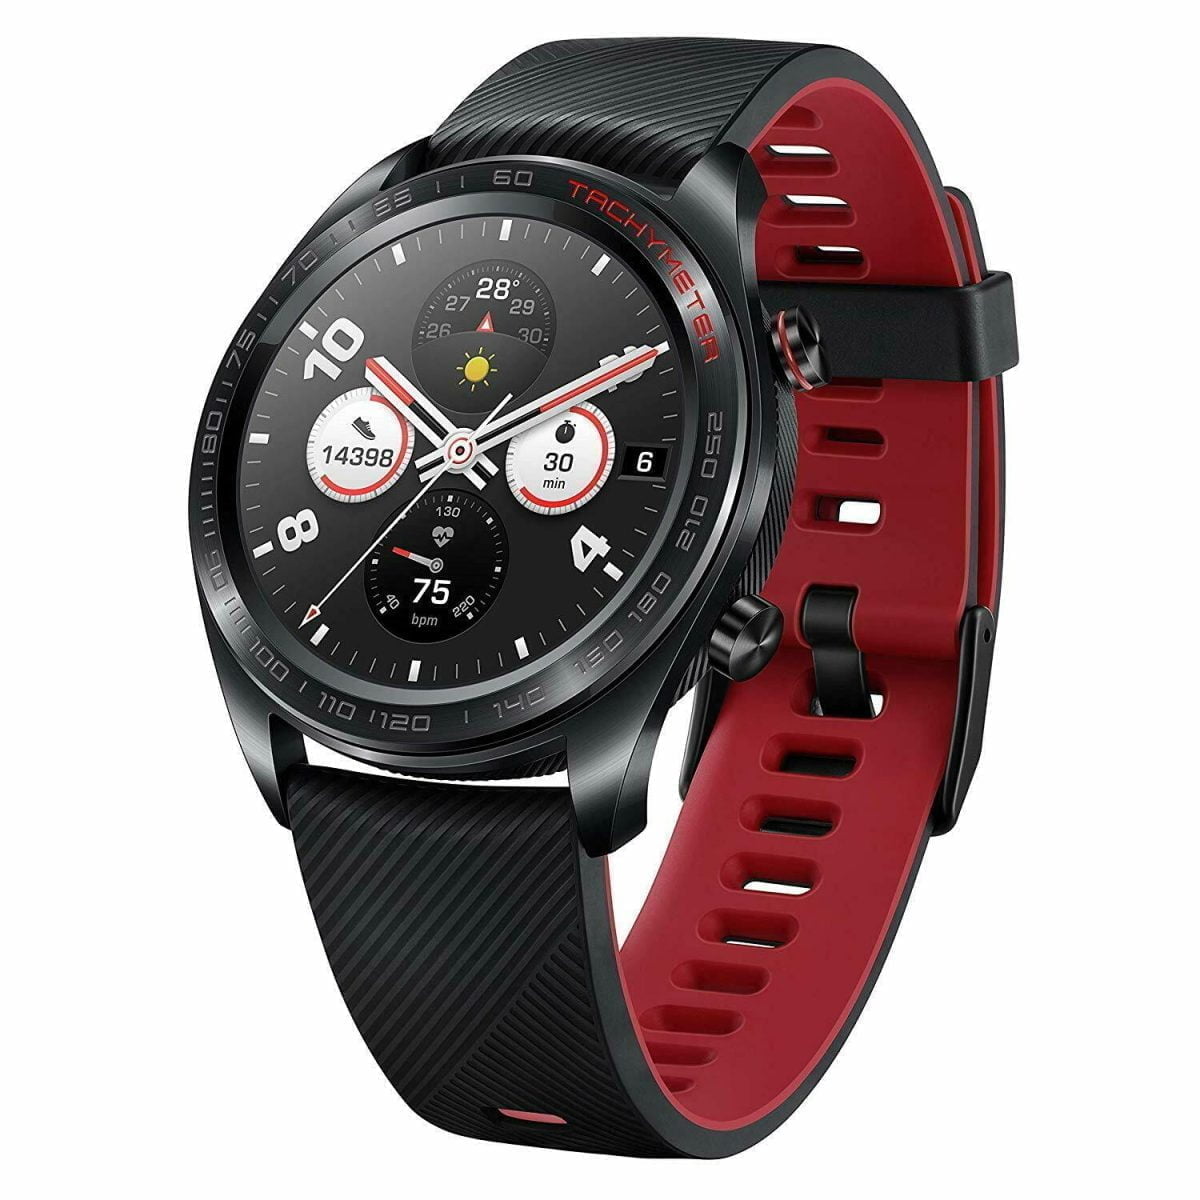 S L1600 7 Huawei &Amp;Lt;P Style=&Amp;Quot;Font-Weight: 400;&Amp;Quot;&Amp;Gt;Carefully Crafted Using 316L Stainless Steel That Is Both Lightweight And Comfortable, The Honor Watch Is One Of The Slimmest Smart Watches On The Market. Polished To Perfection, Honor Watch Adopts Cnc Machining And The Latest Laser Engraving To Boost Durability For Daily Use. As A Finishing Touch, The Shell Of The Watch Is Made Of Biodegradable Nylon Plastic.&Amp;Lt;/P&Amp;Gt; Https://Www.youtube.com/Watch?V=Ek-Byxwvj2K Honor Watch Magic Smart Honor Watch Magic Smart Watch Amoled Gps Multi-Sport (Lava Black And Red Silicone Strap)